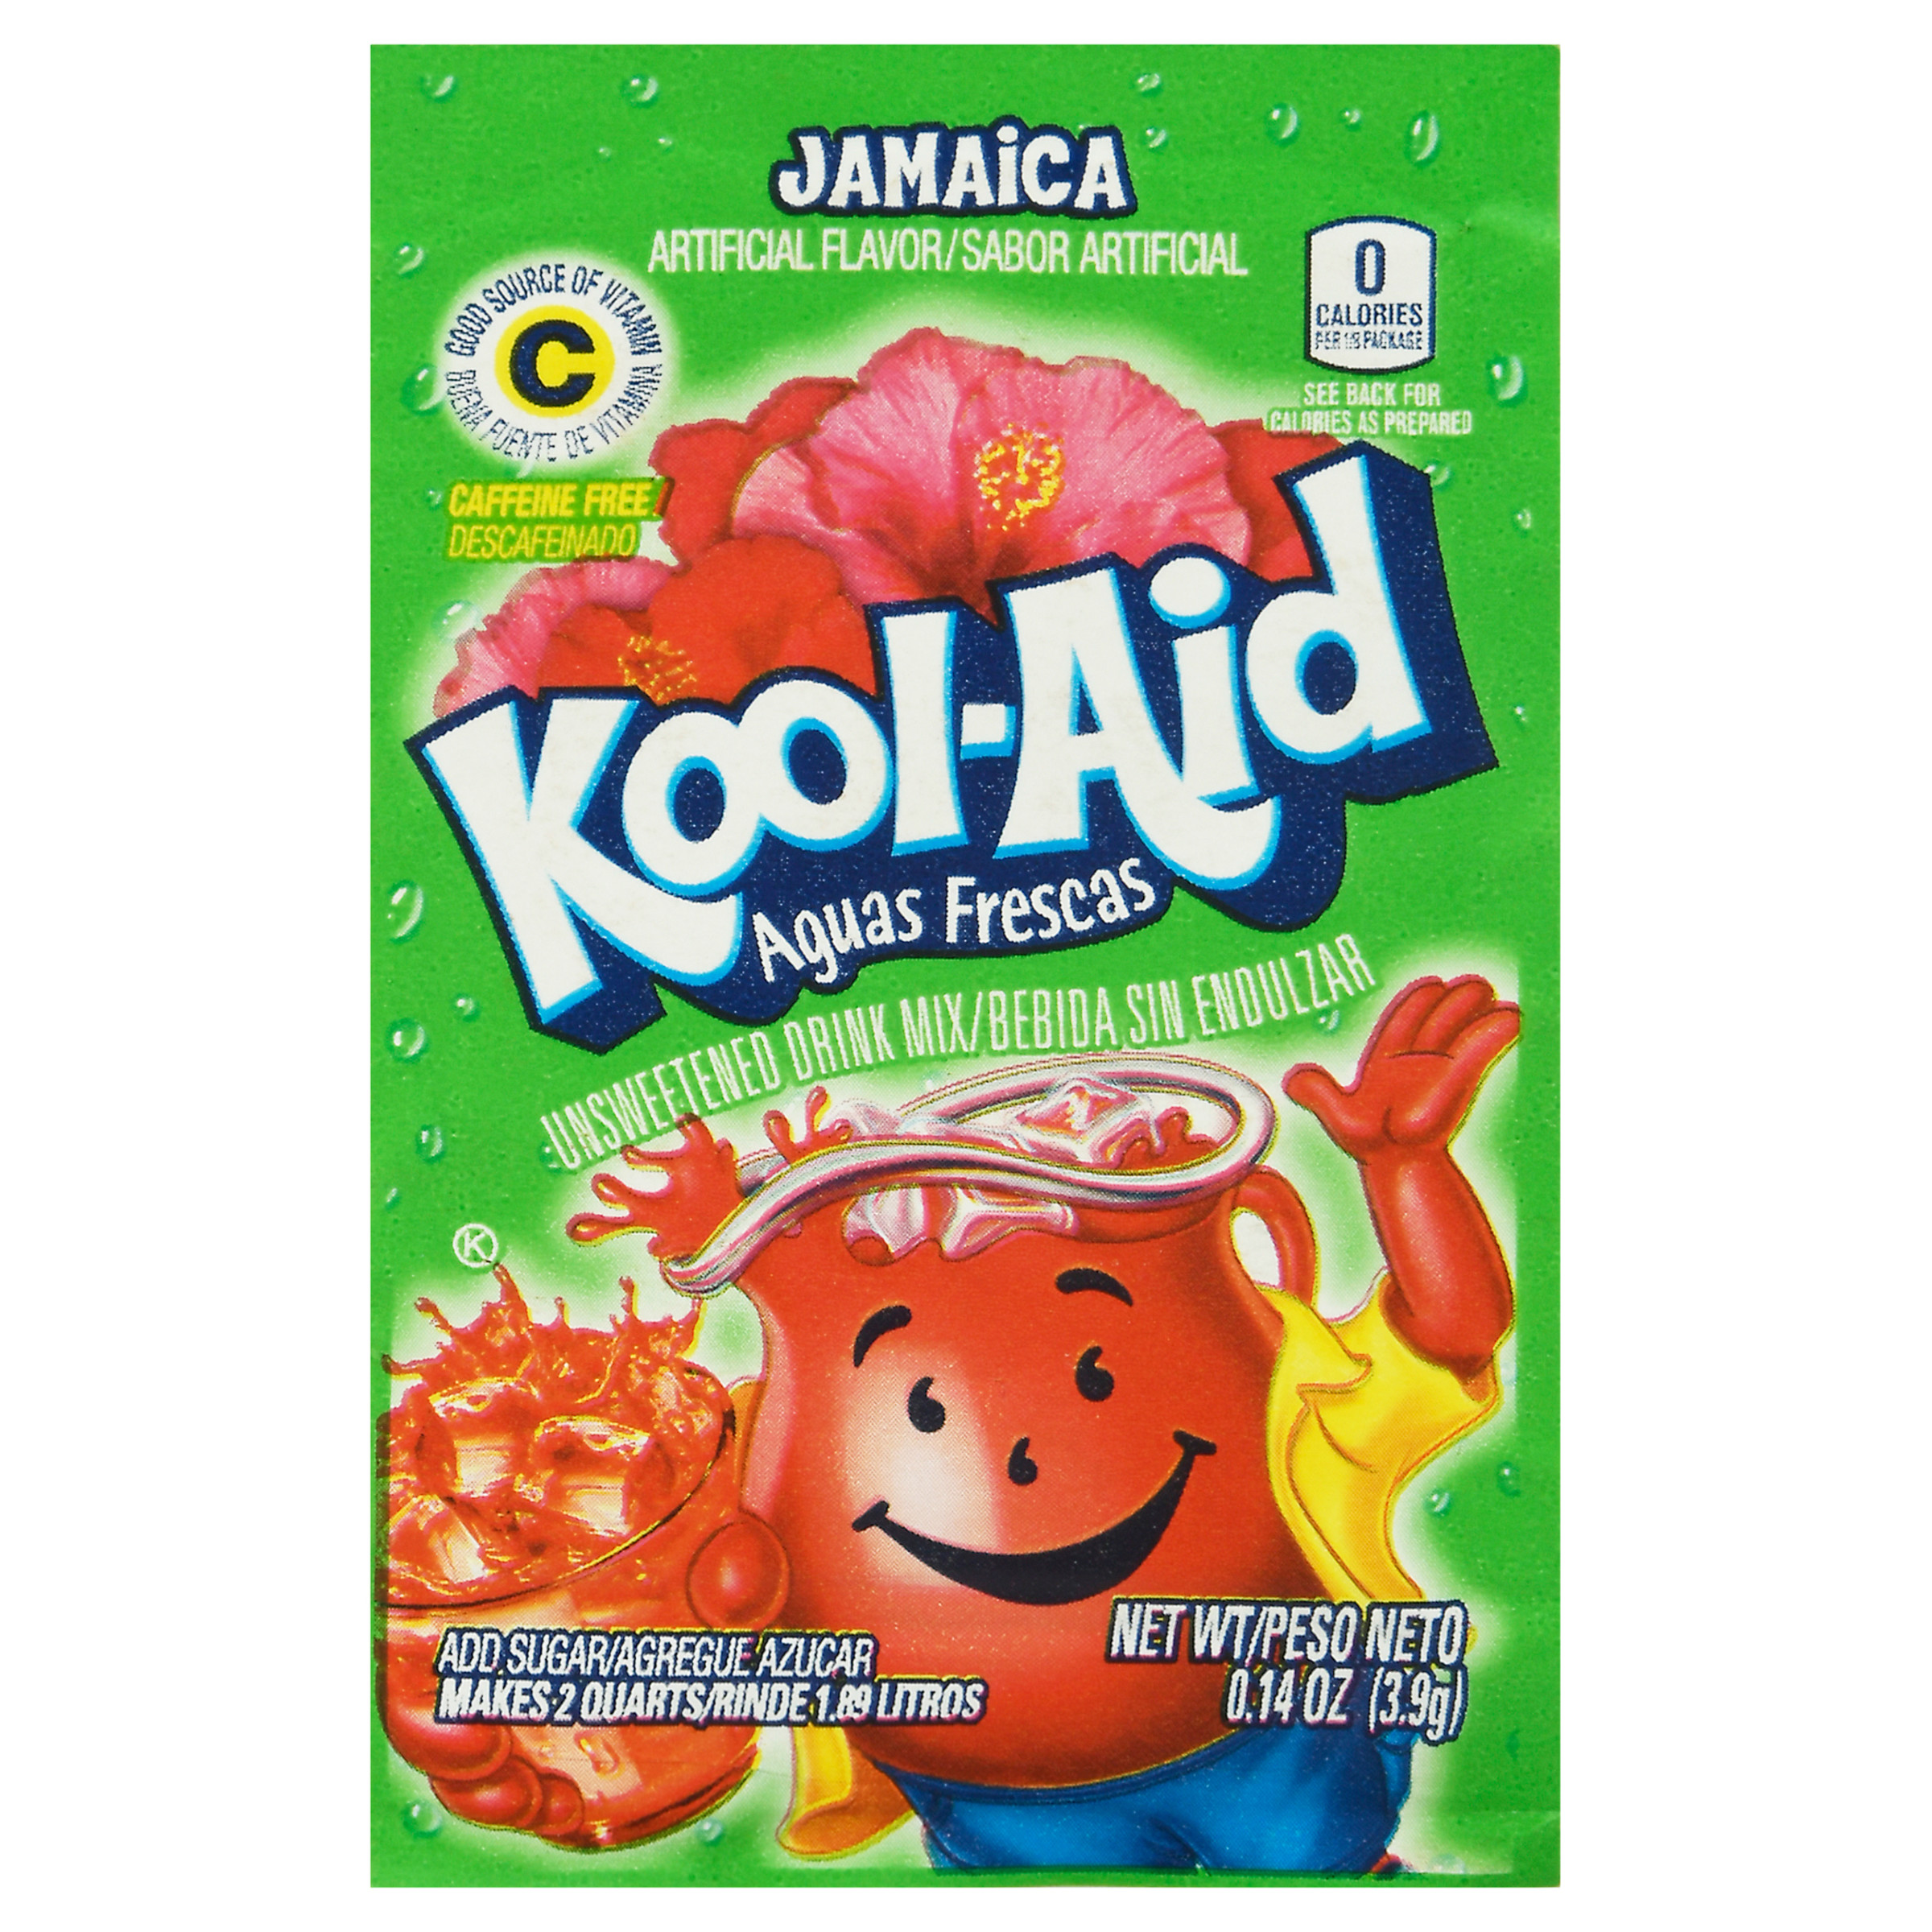 Kool-Aid Aguas Frescas Unsweetened Jamaica Artifically Flavored Powdered Soft Drink Mix, 0.14 oz Packet - image 3 of 8